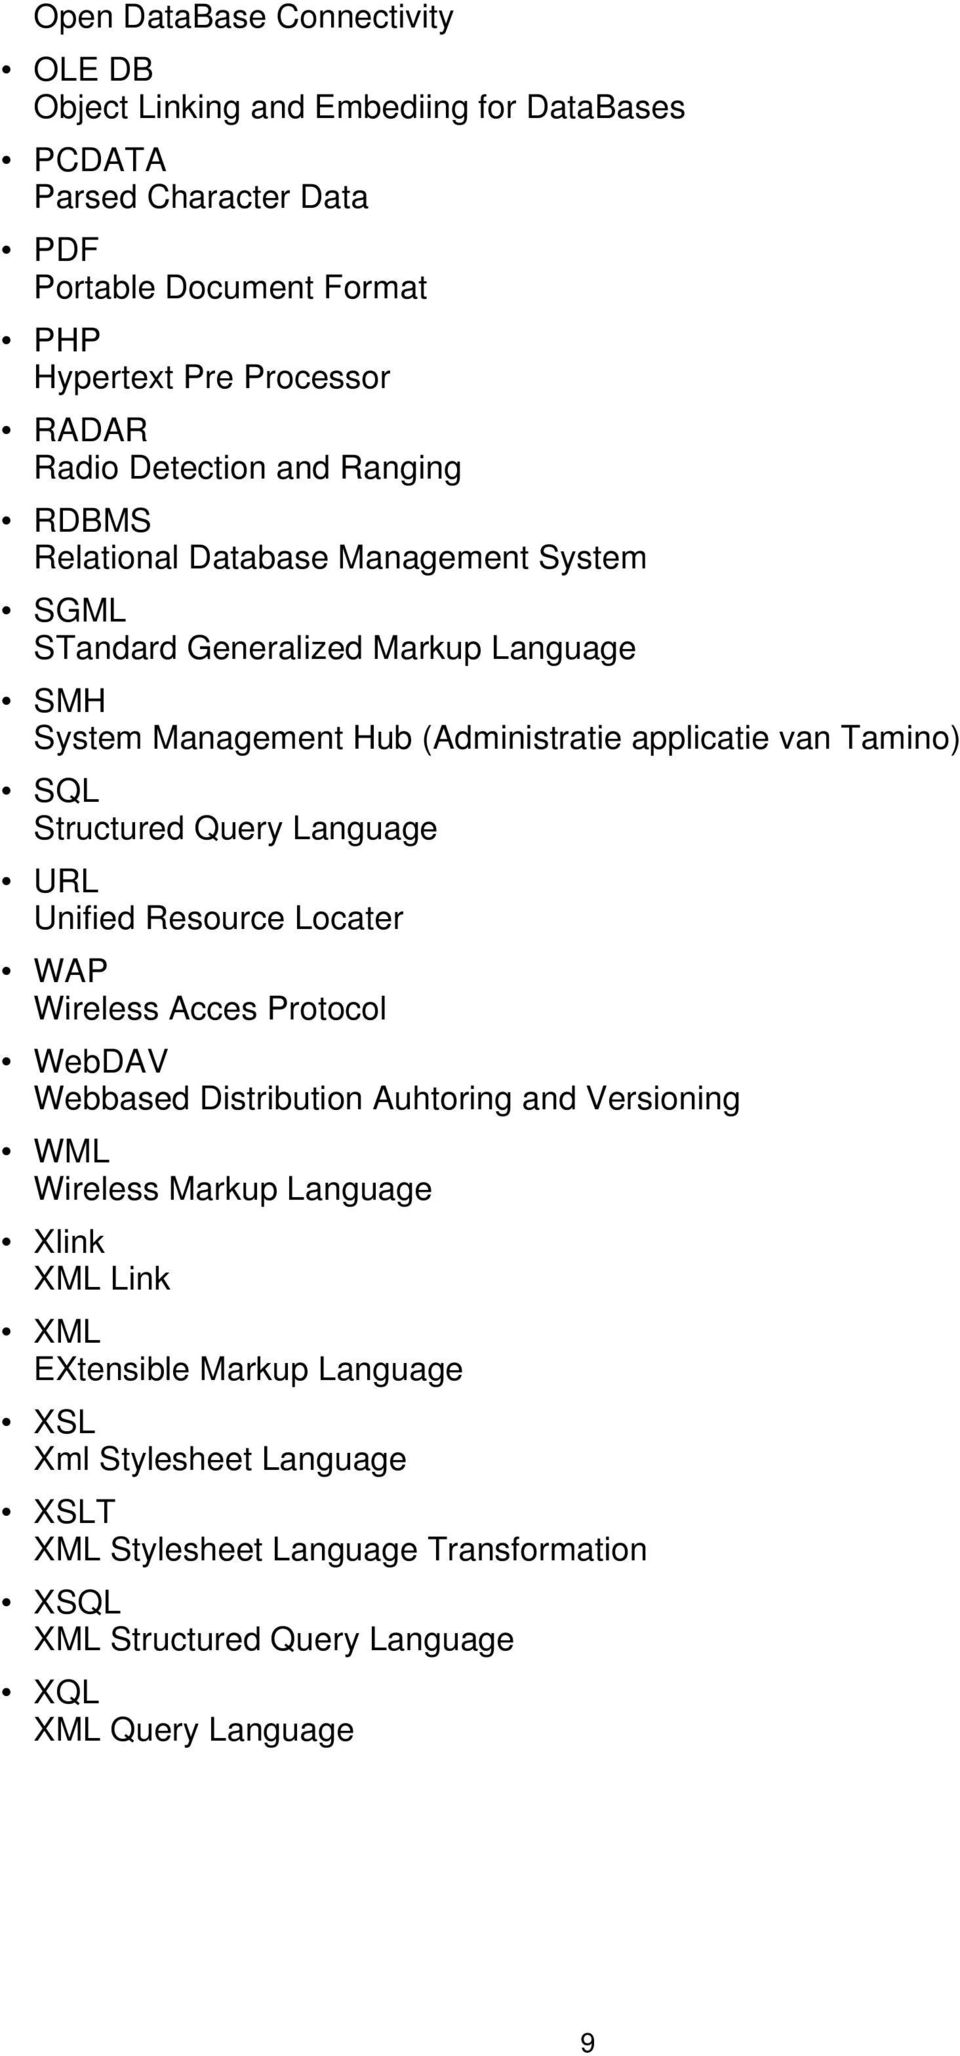 Tamino) SQL Structured Query Language URL Unified Resource Locater WAP Wireless Acces Protocol WebDAV Webbased Distribution Auhtoring and Versioning WML Wireless Markup